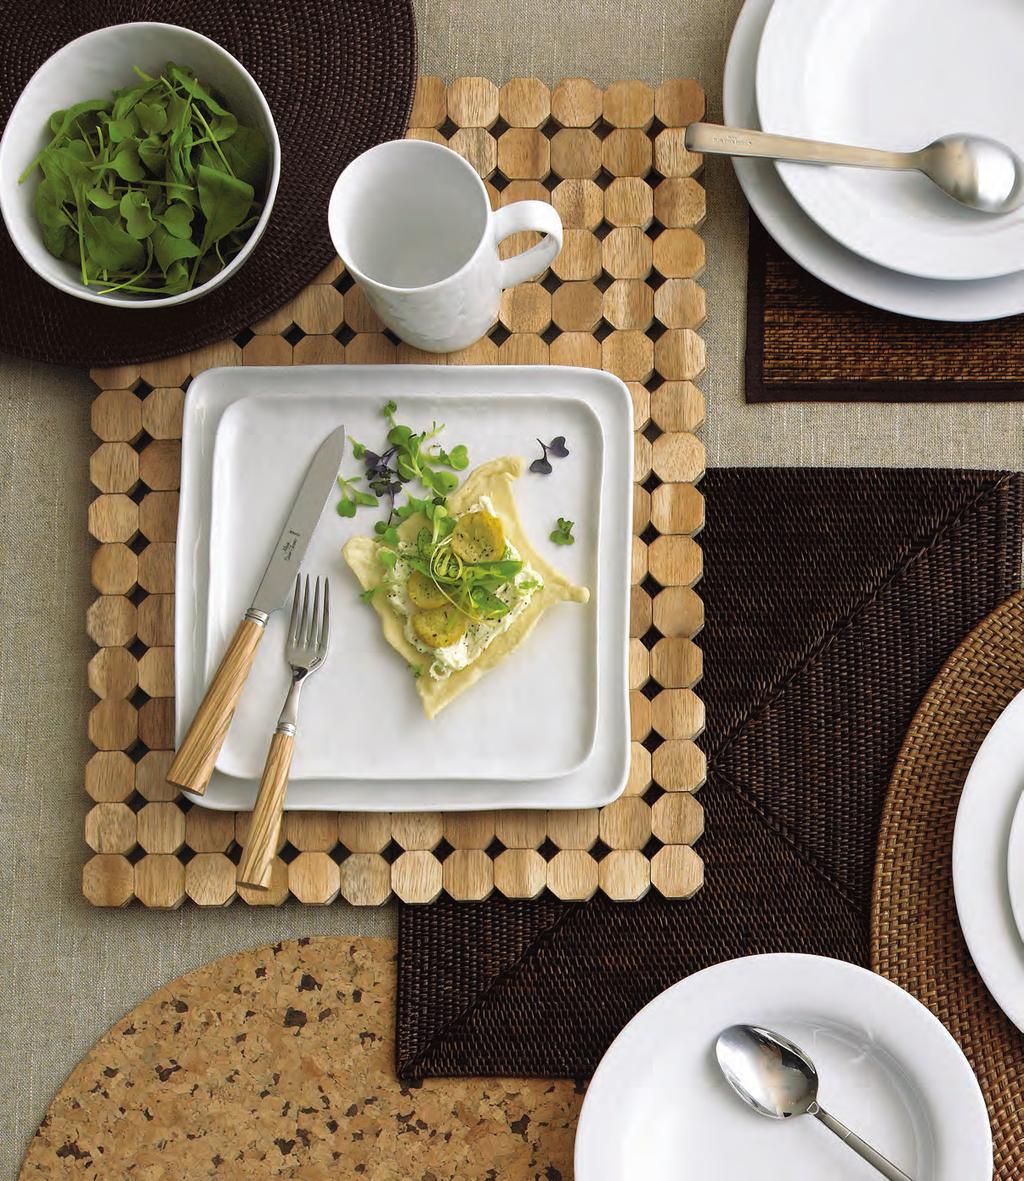 4 7 6 9 0 KEEP IT CASUAL The natural textures of handwoven fibres and wood mosaics add a casual backdrop to white porcelain dinnerware. 4 8 4 Call 888.67.408 to order. Or shop our stores.